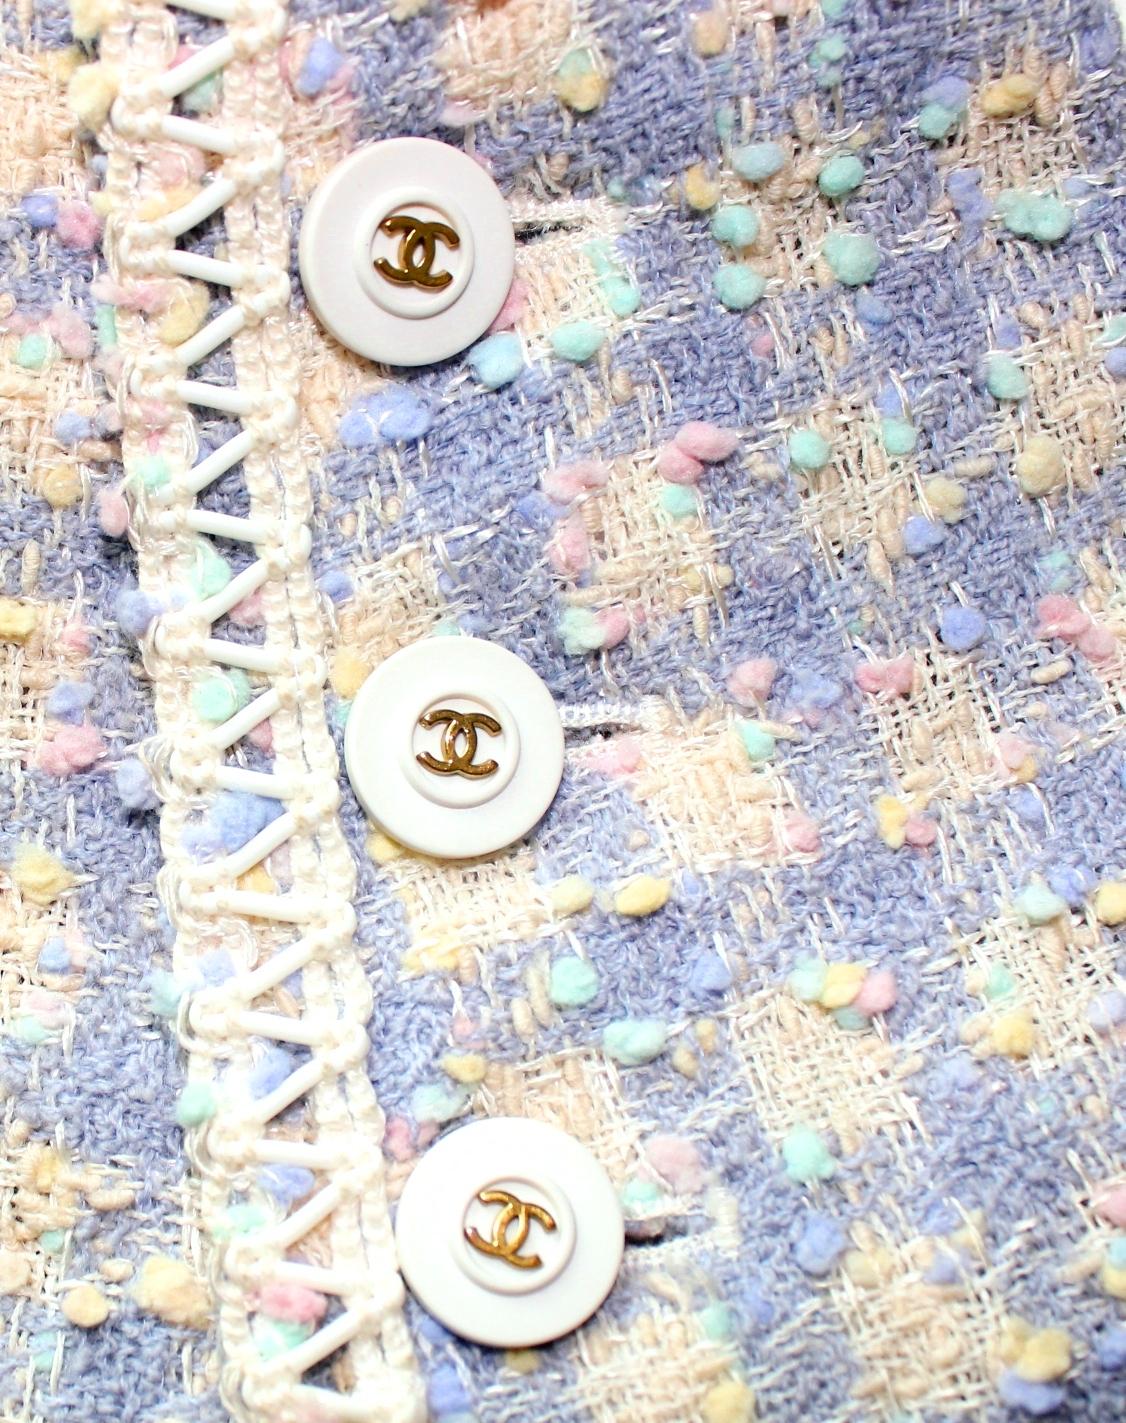 Rare Documented Chanel Lesage Tweed Jacket Blazer 1994 Collection at ...